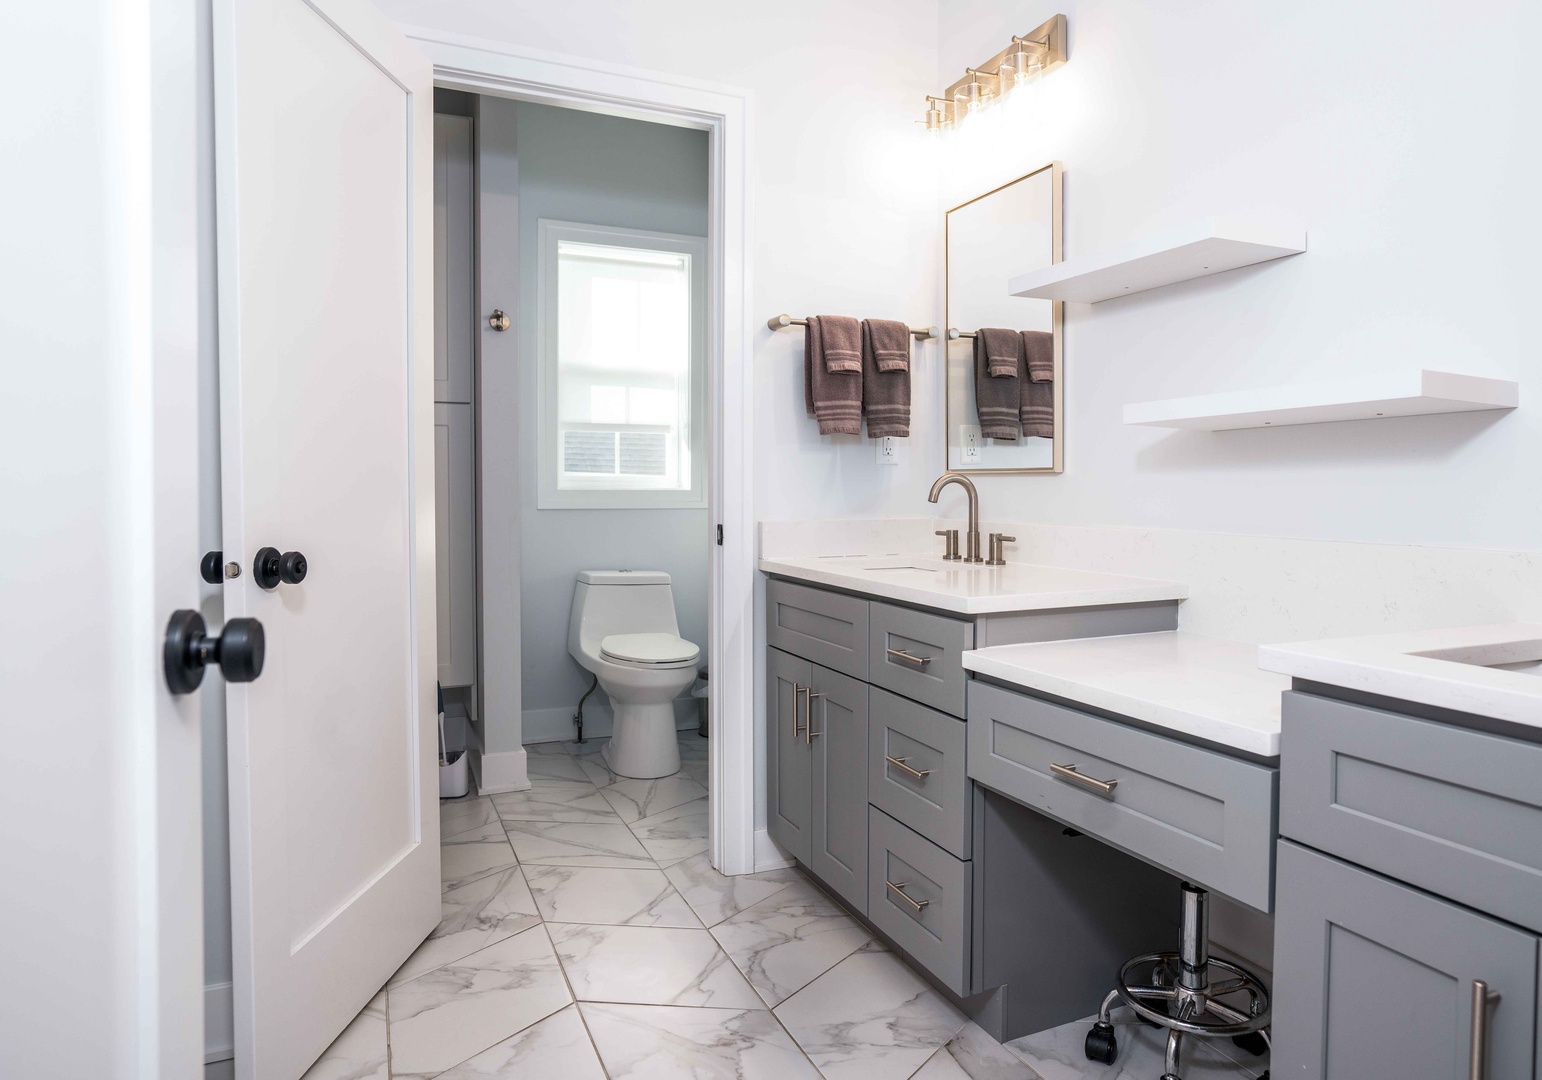 This private ensuite features a double vanity, makeup counter, & shower